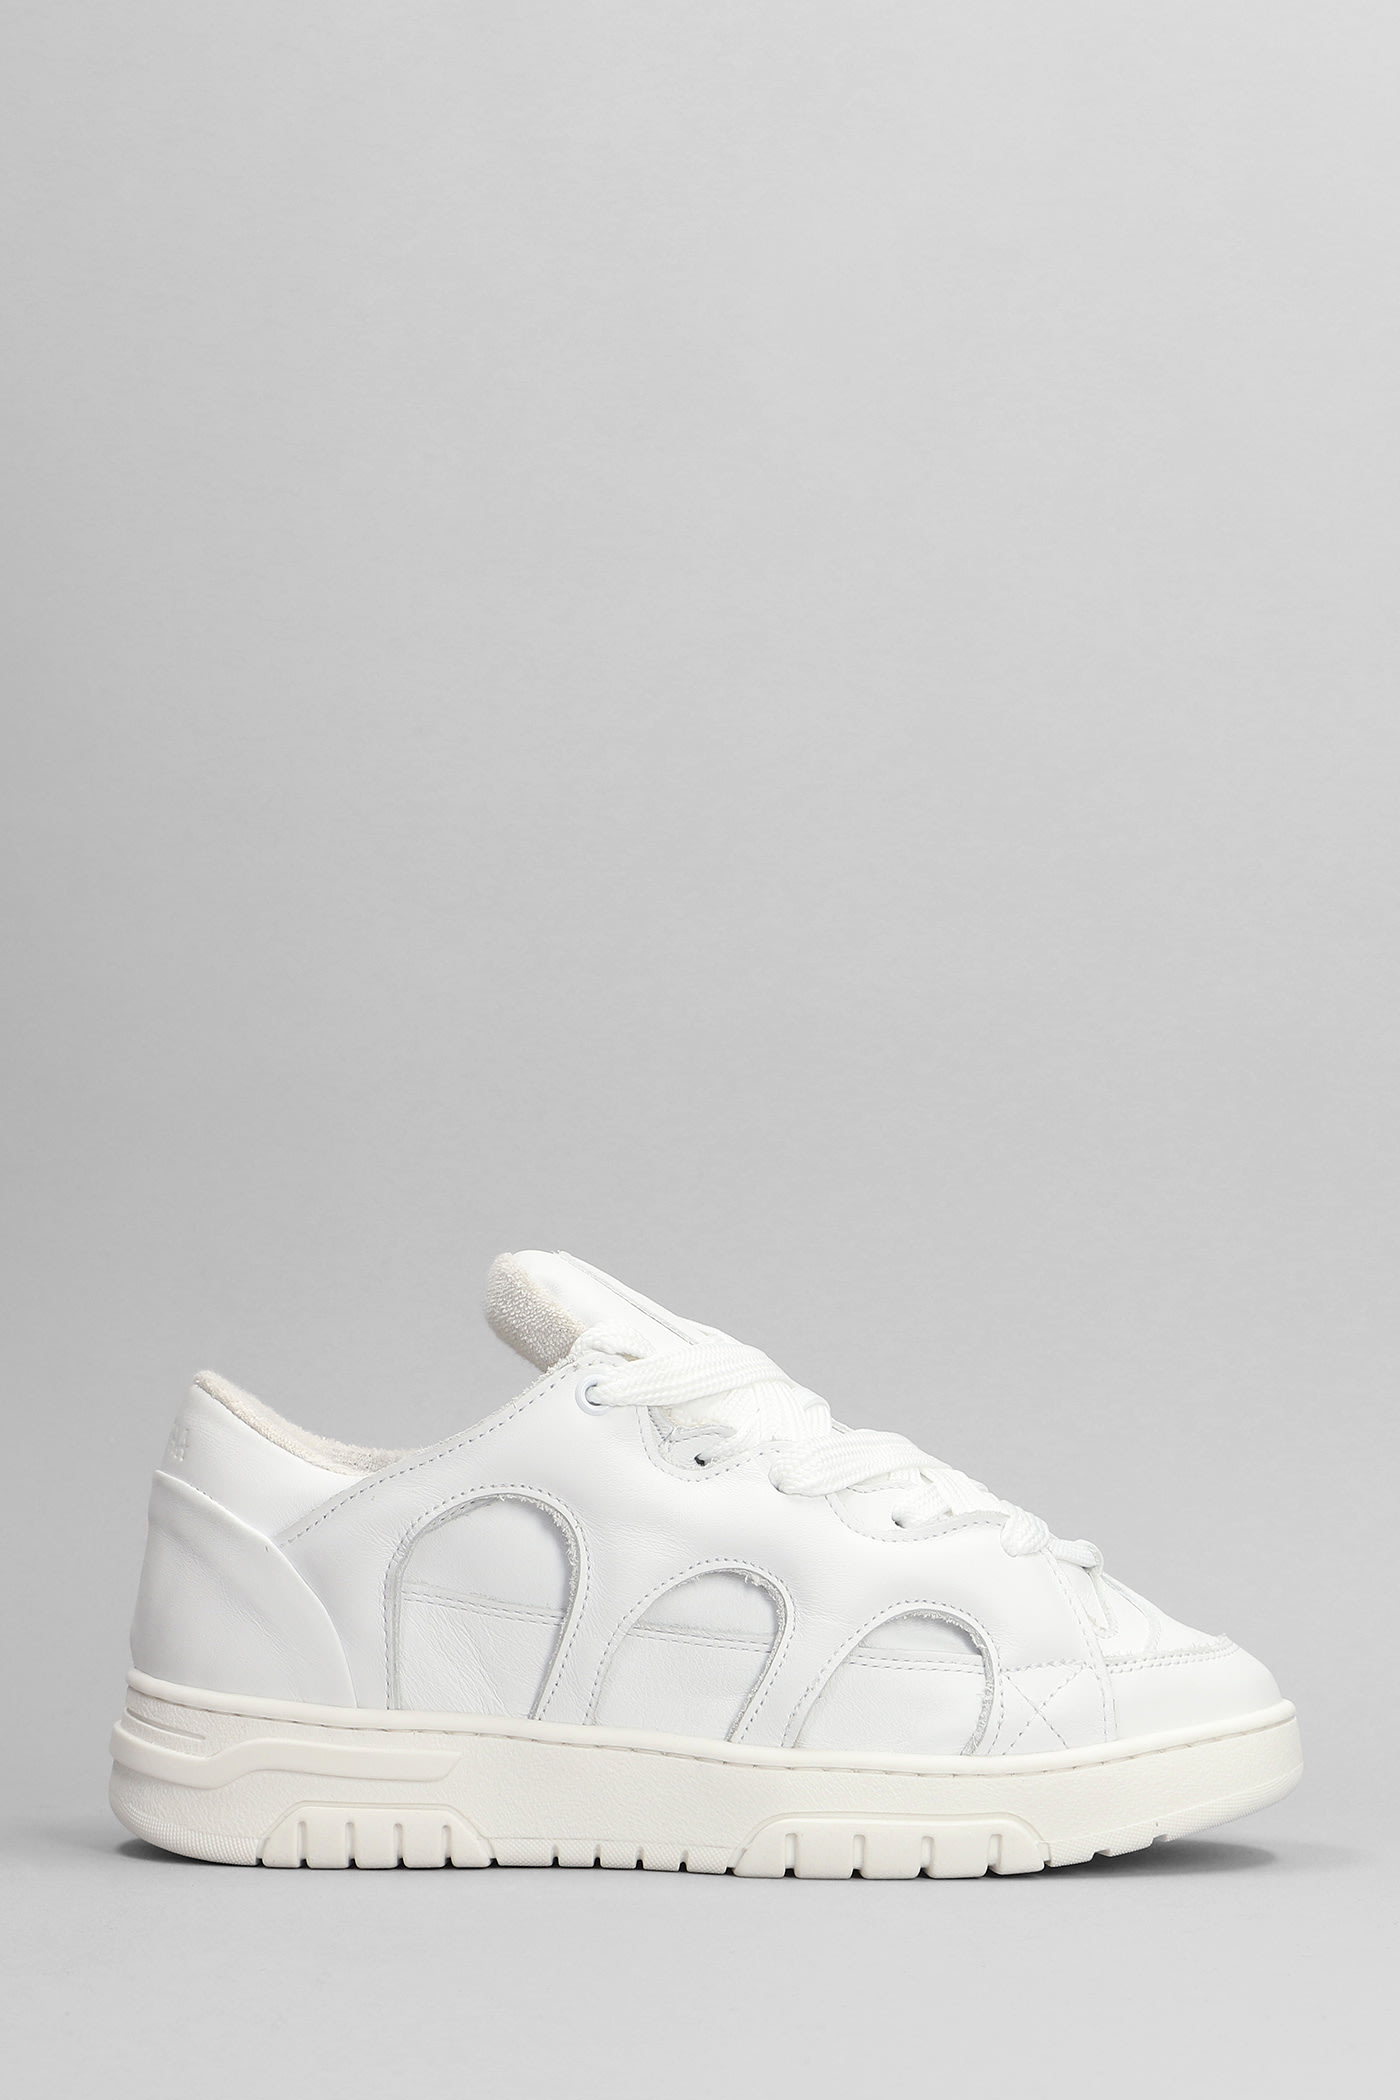 Paura Santha 1 Trainers In White Leather